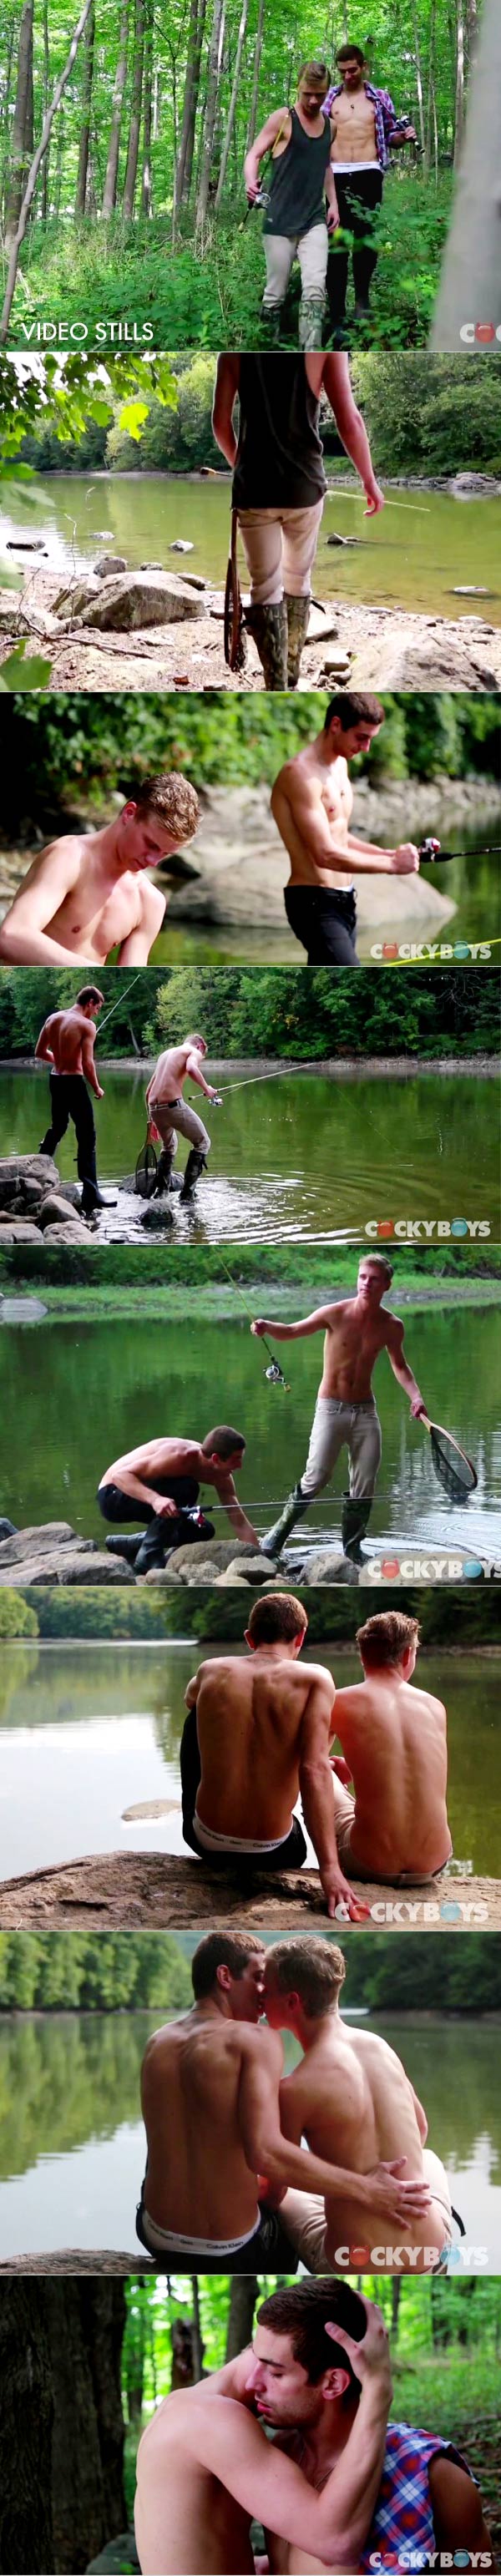 Dillon Rossi and Max Ryder (Go Fishing and Fuck!) at CockyBoys.com